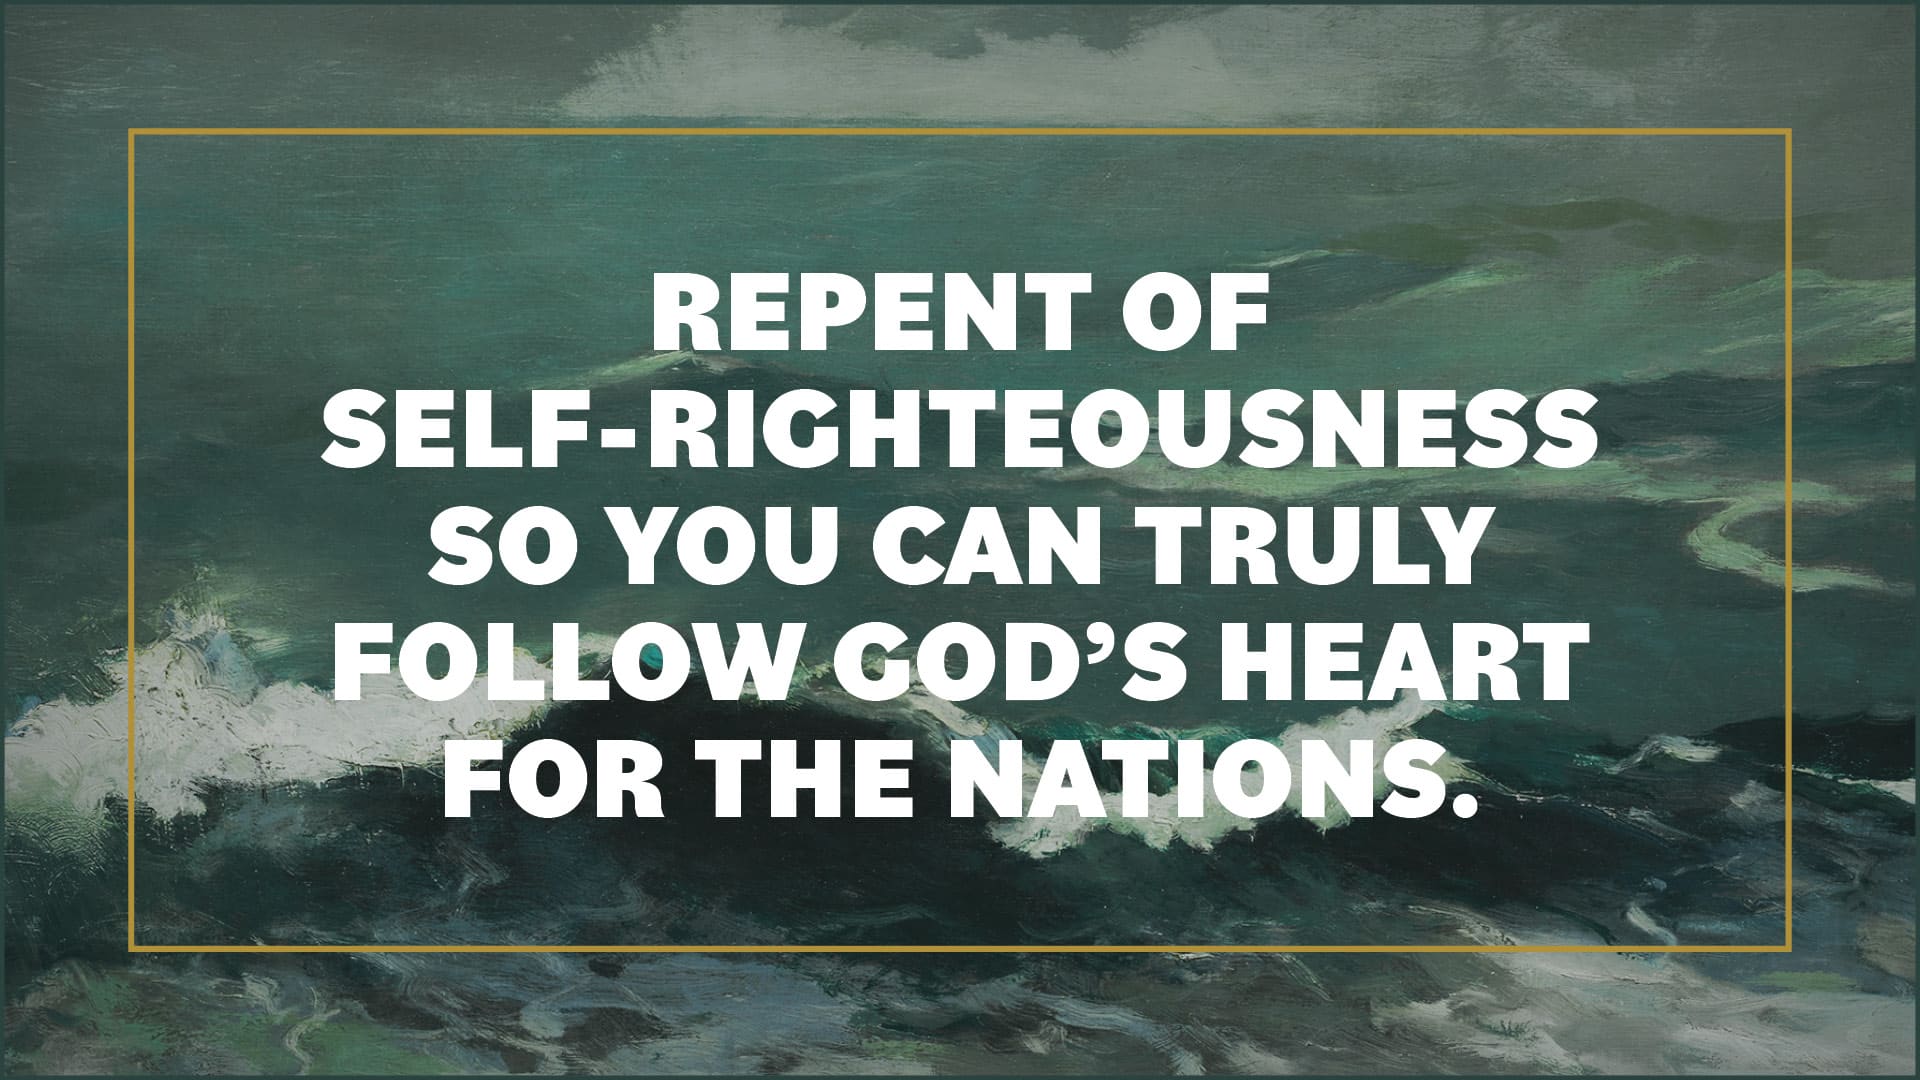 Repent of self-righteousness so that you can truly follow God’s heart for the nations.